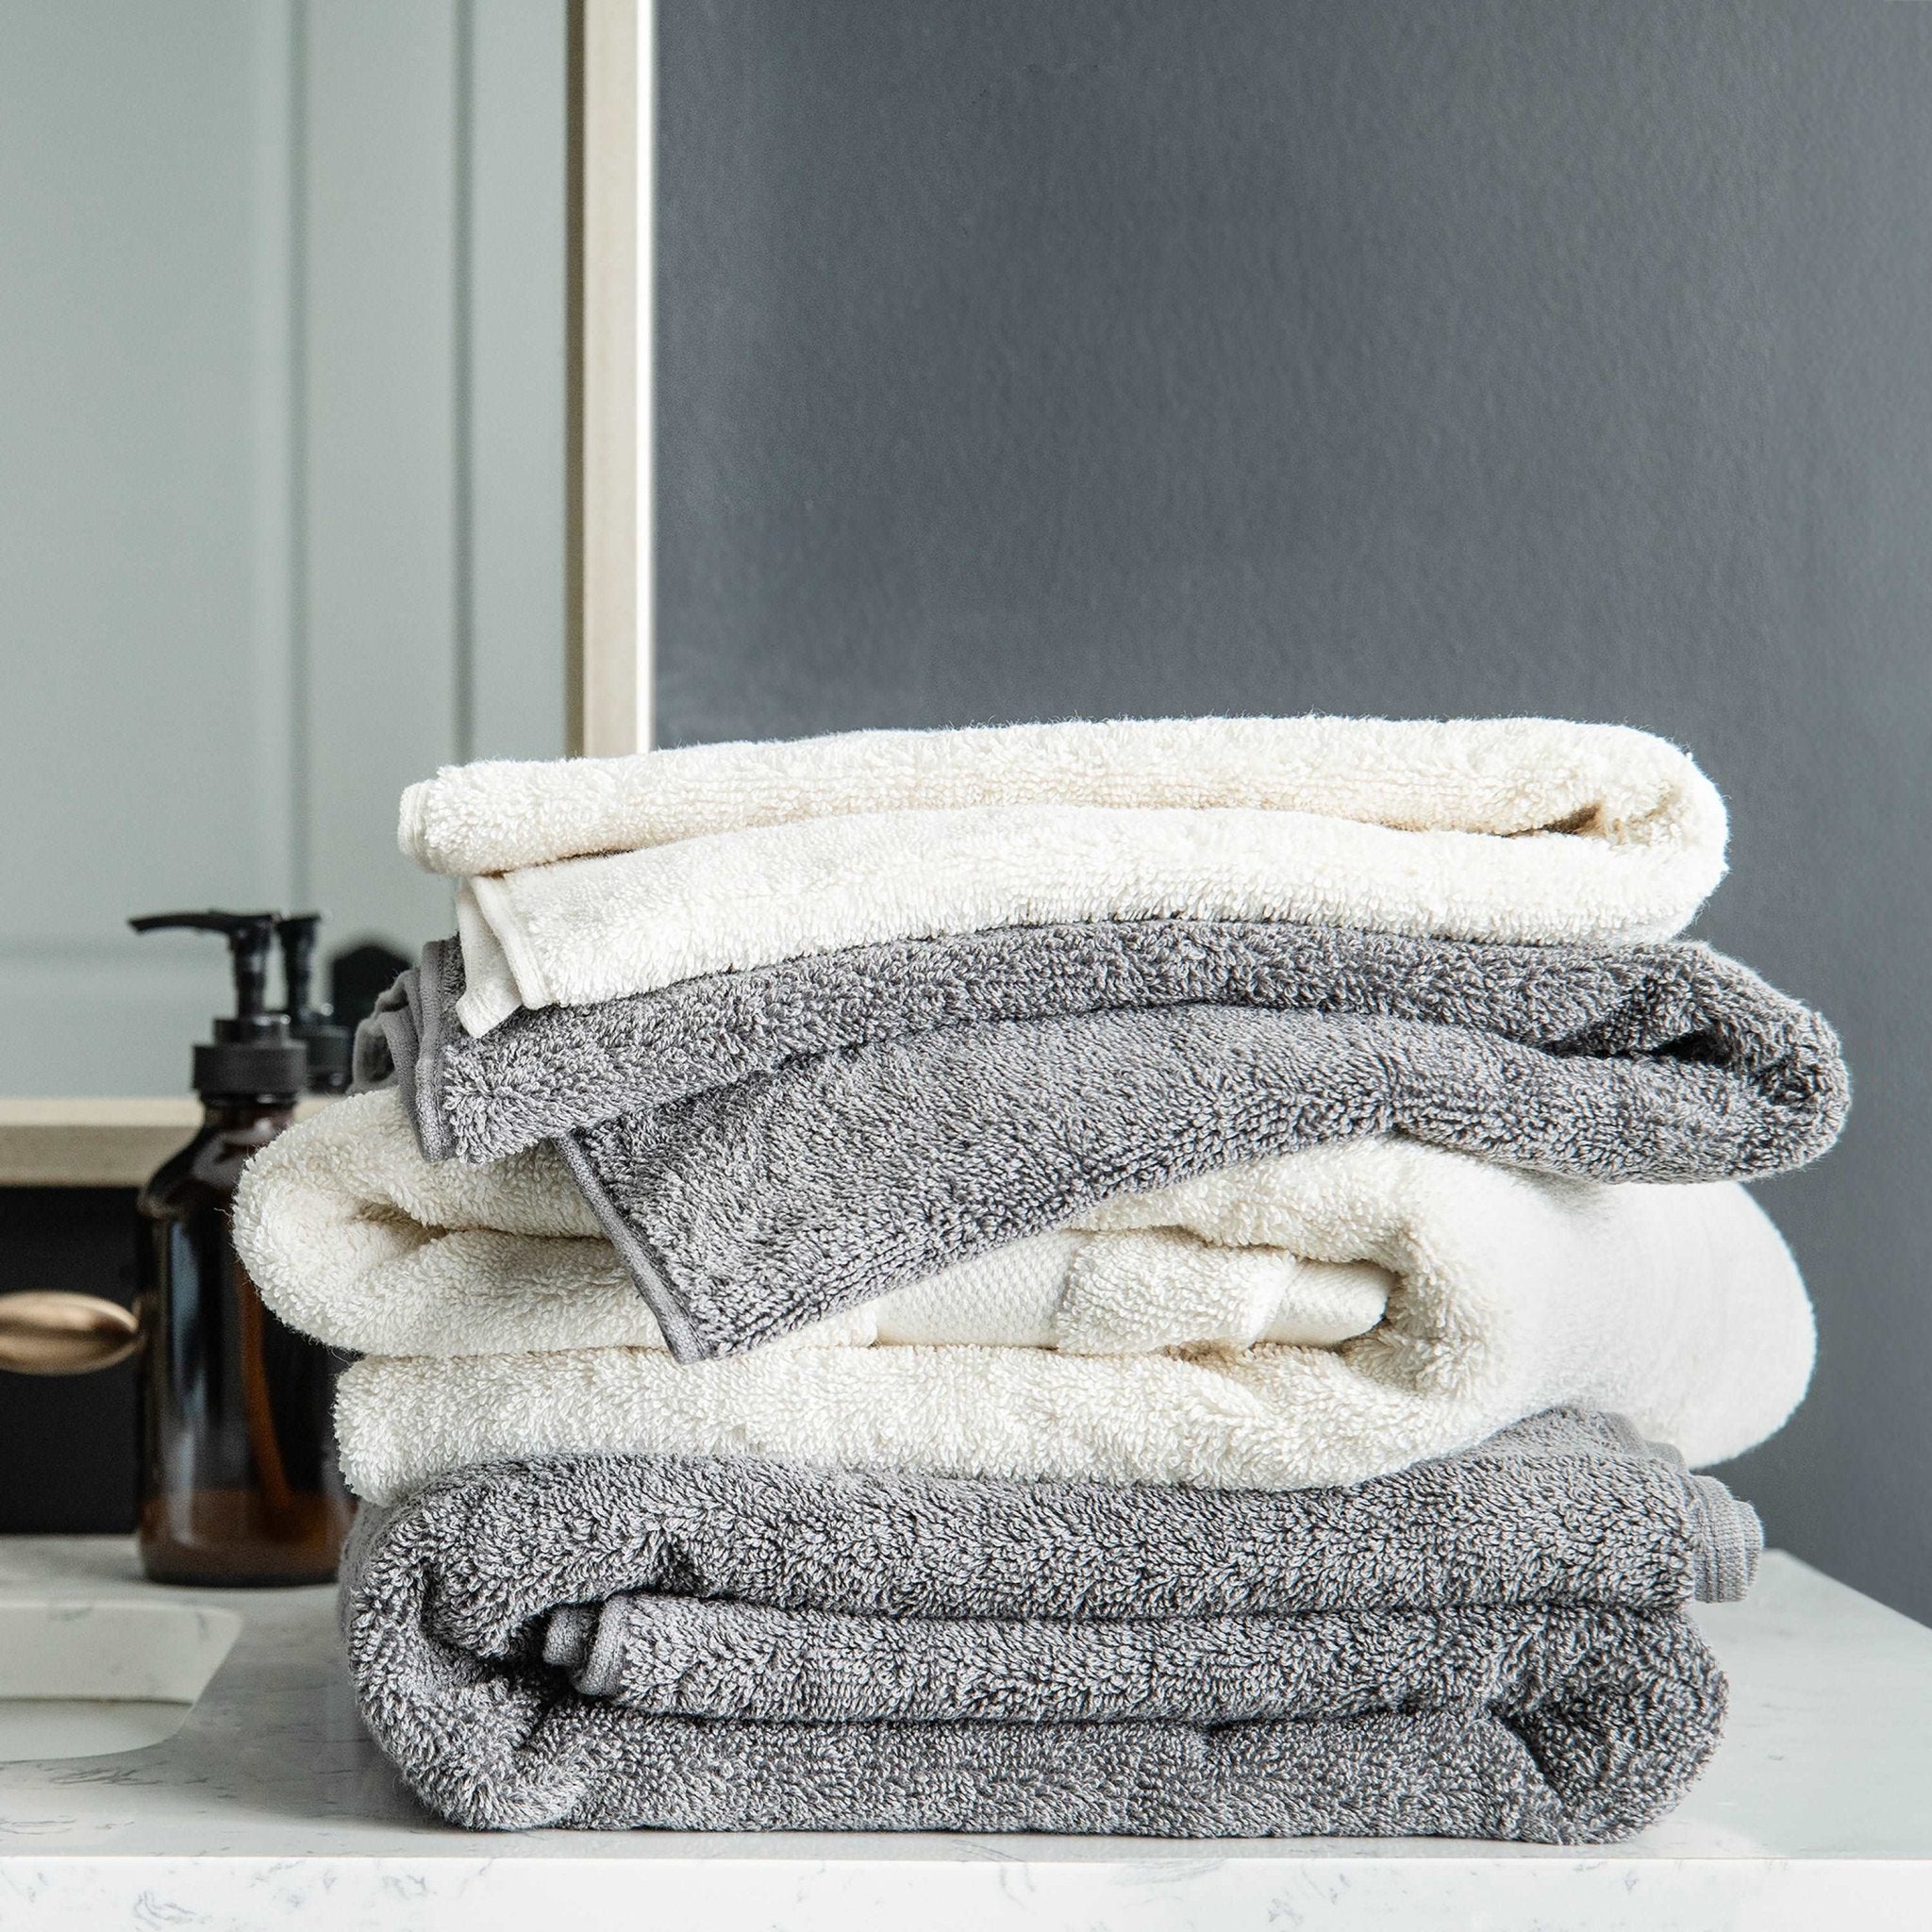 100% Organic Cotton Quick Dry Hand Towel (Navy Blue) (Pack of 2) - DelaraHome